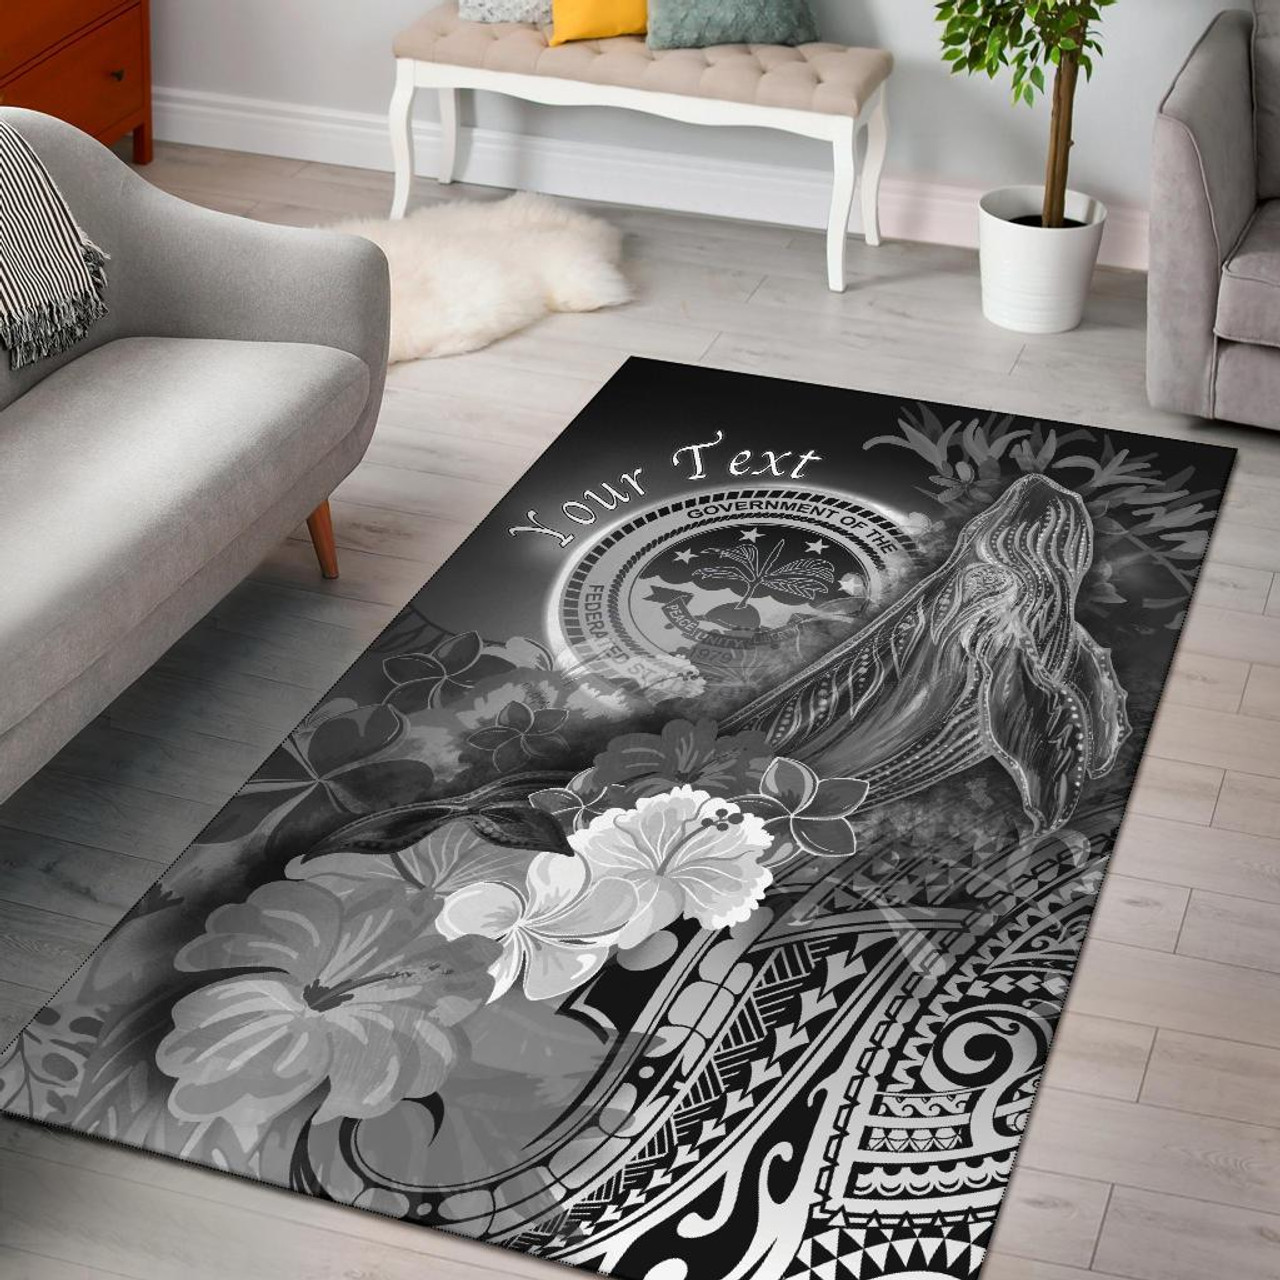 Federated States of Micronesia Custom Personalised Area Rug - Humpback Whale with Tropical Flowers (White) Polynesian 1